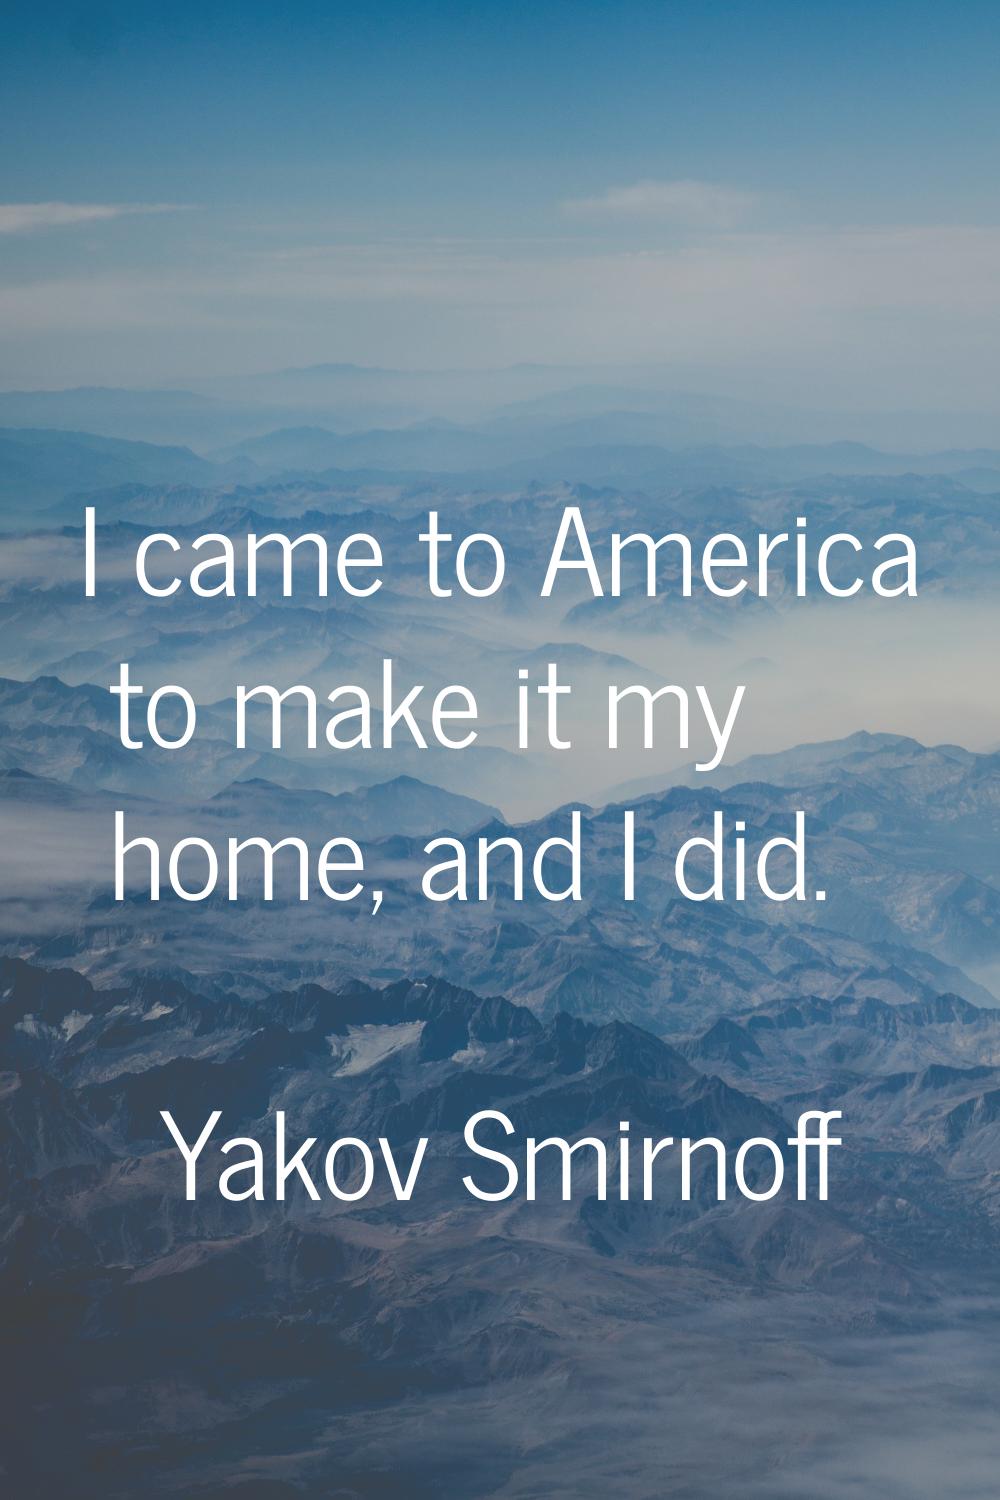 I came to America to make it my home, and I did.